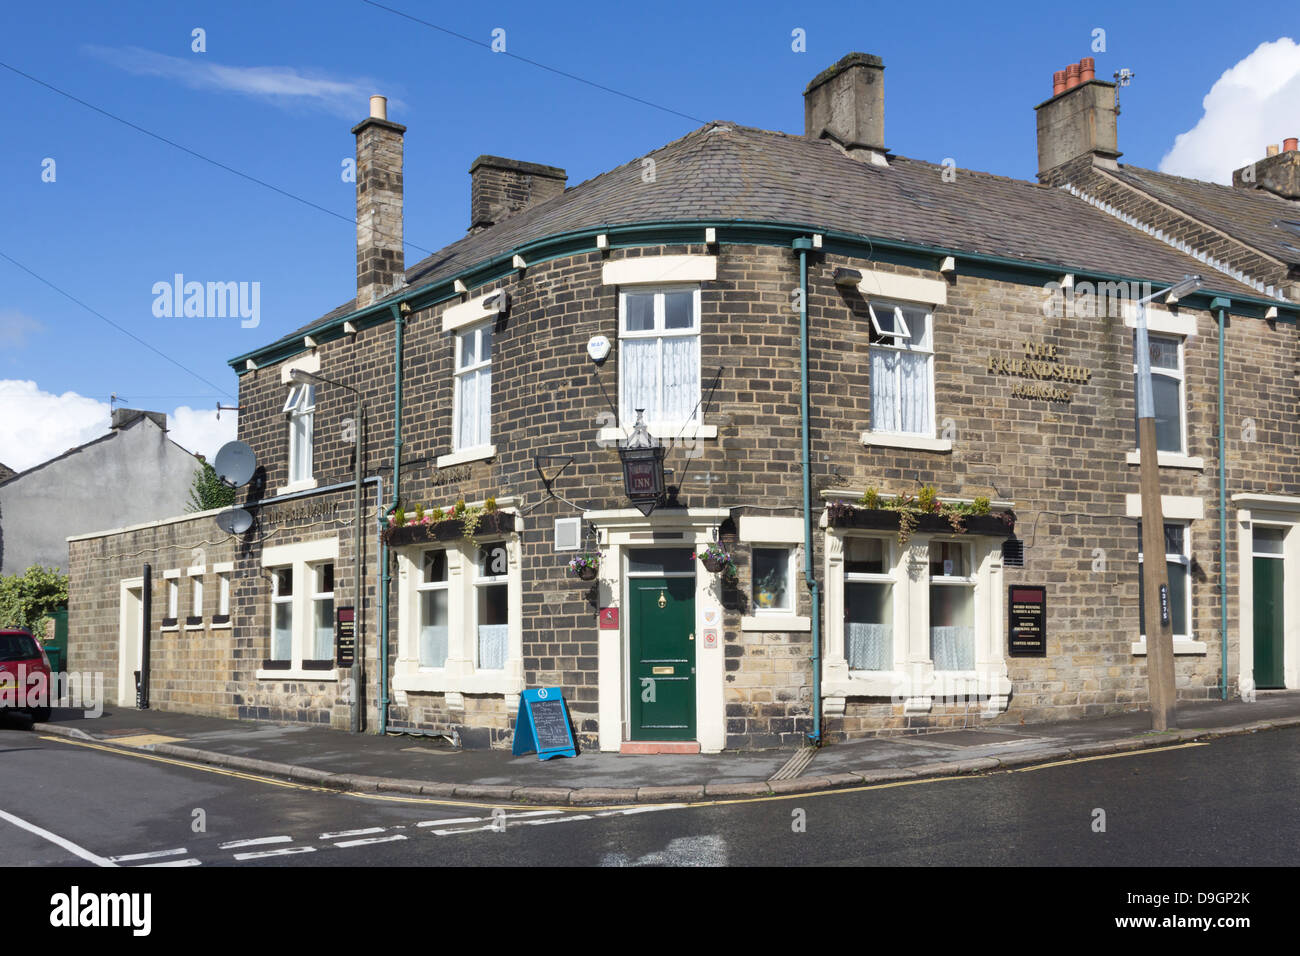 The Friendship Inn on Arundel Street Glossop. A street corner, local pub supplied by Robinsons brewery of Stockport. Stock Photo